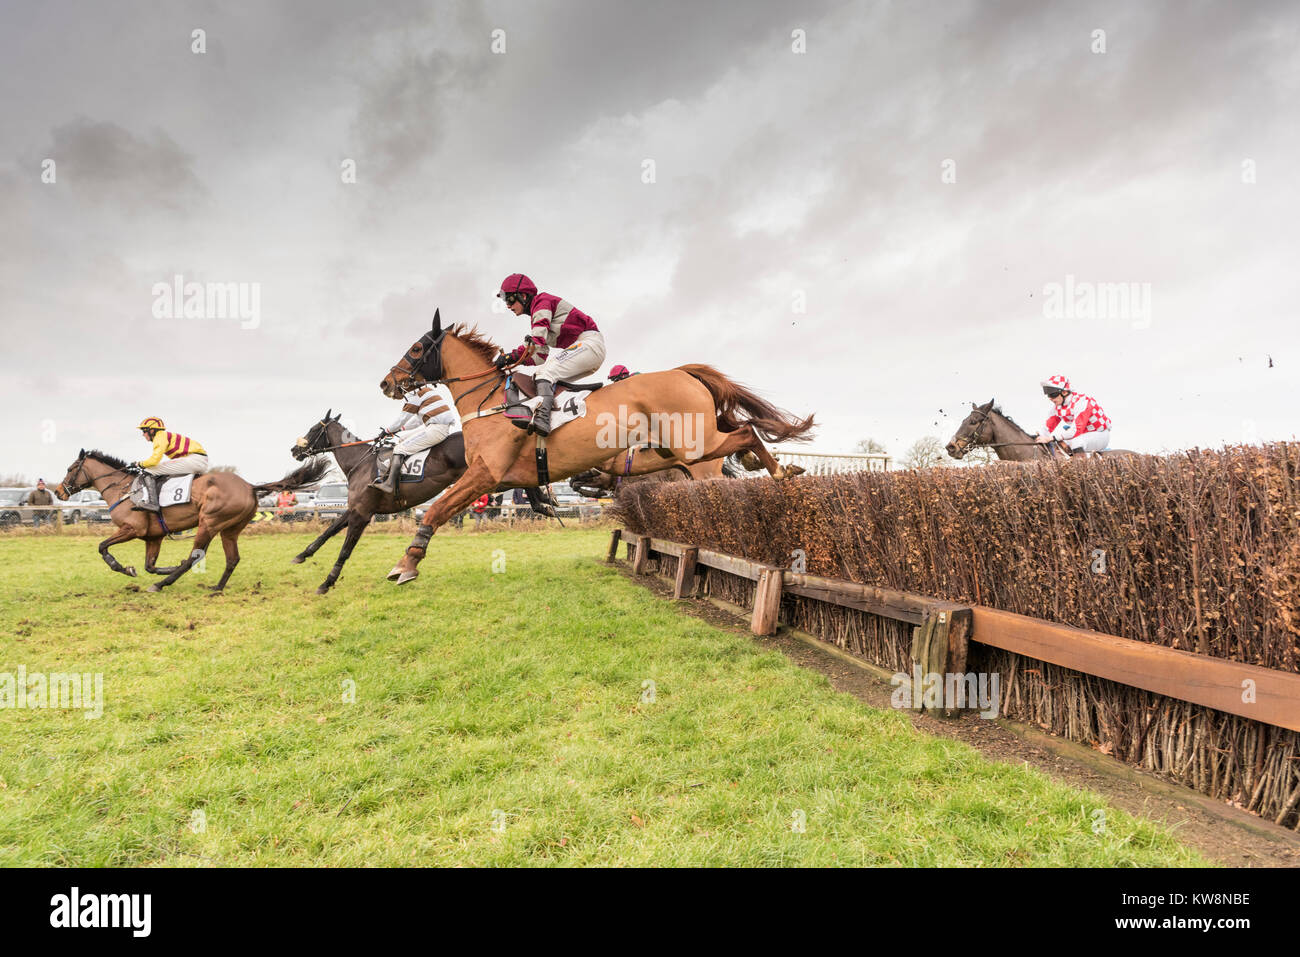 Cambridgeshire, UK. 31st December, 2017. Cottenham, Cambridgeshire UK 31st December 2017.   Runners and riders take part in the Cambridgeshire Harriers Hunt Club Point-to-Point Races.  The small, rural racecourse holds the traditional New Year’s Eve meeting each year where riders compete in horse racing over hurdles on hunting horses. Credit: Julian Eales/Alamy Live News Stock Photo